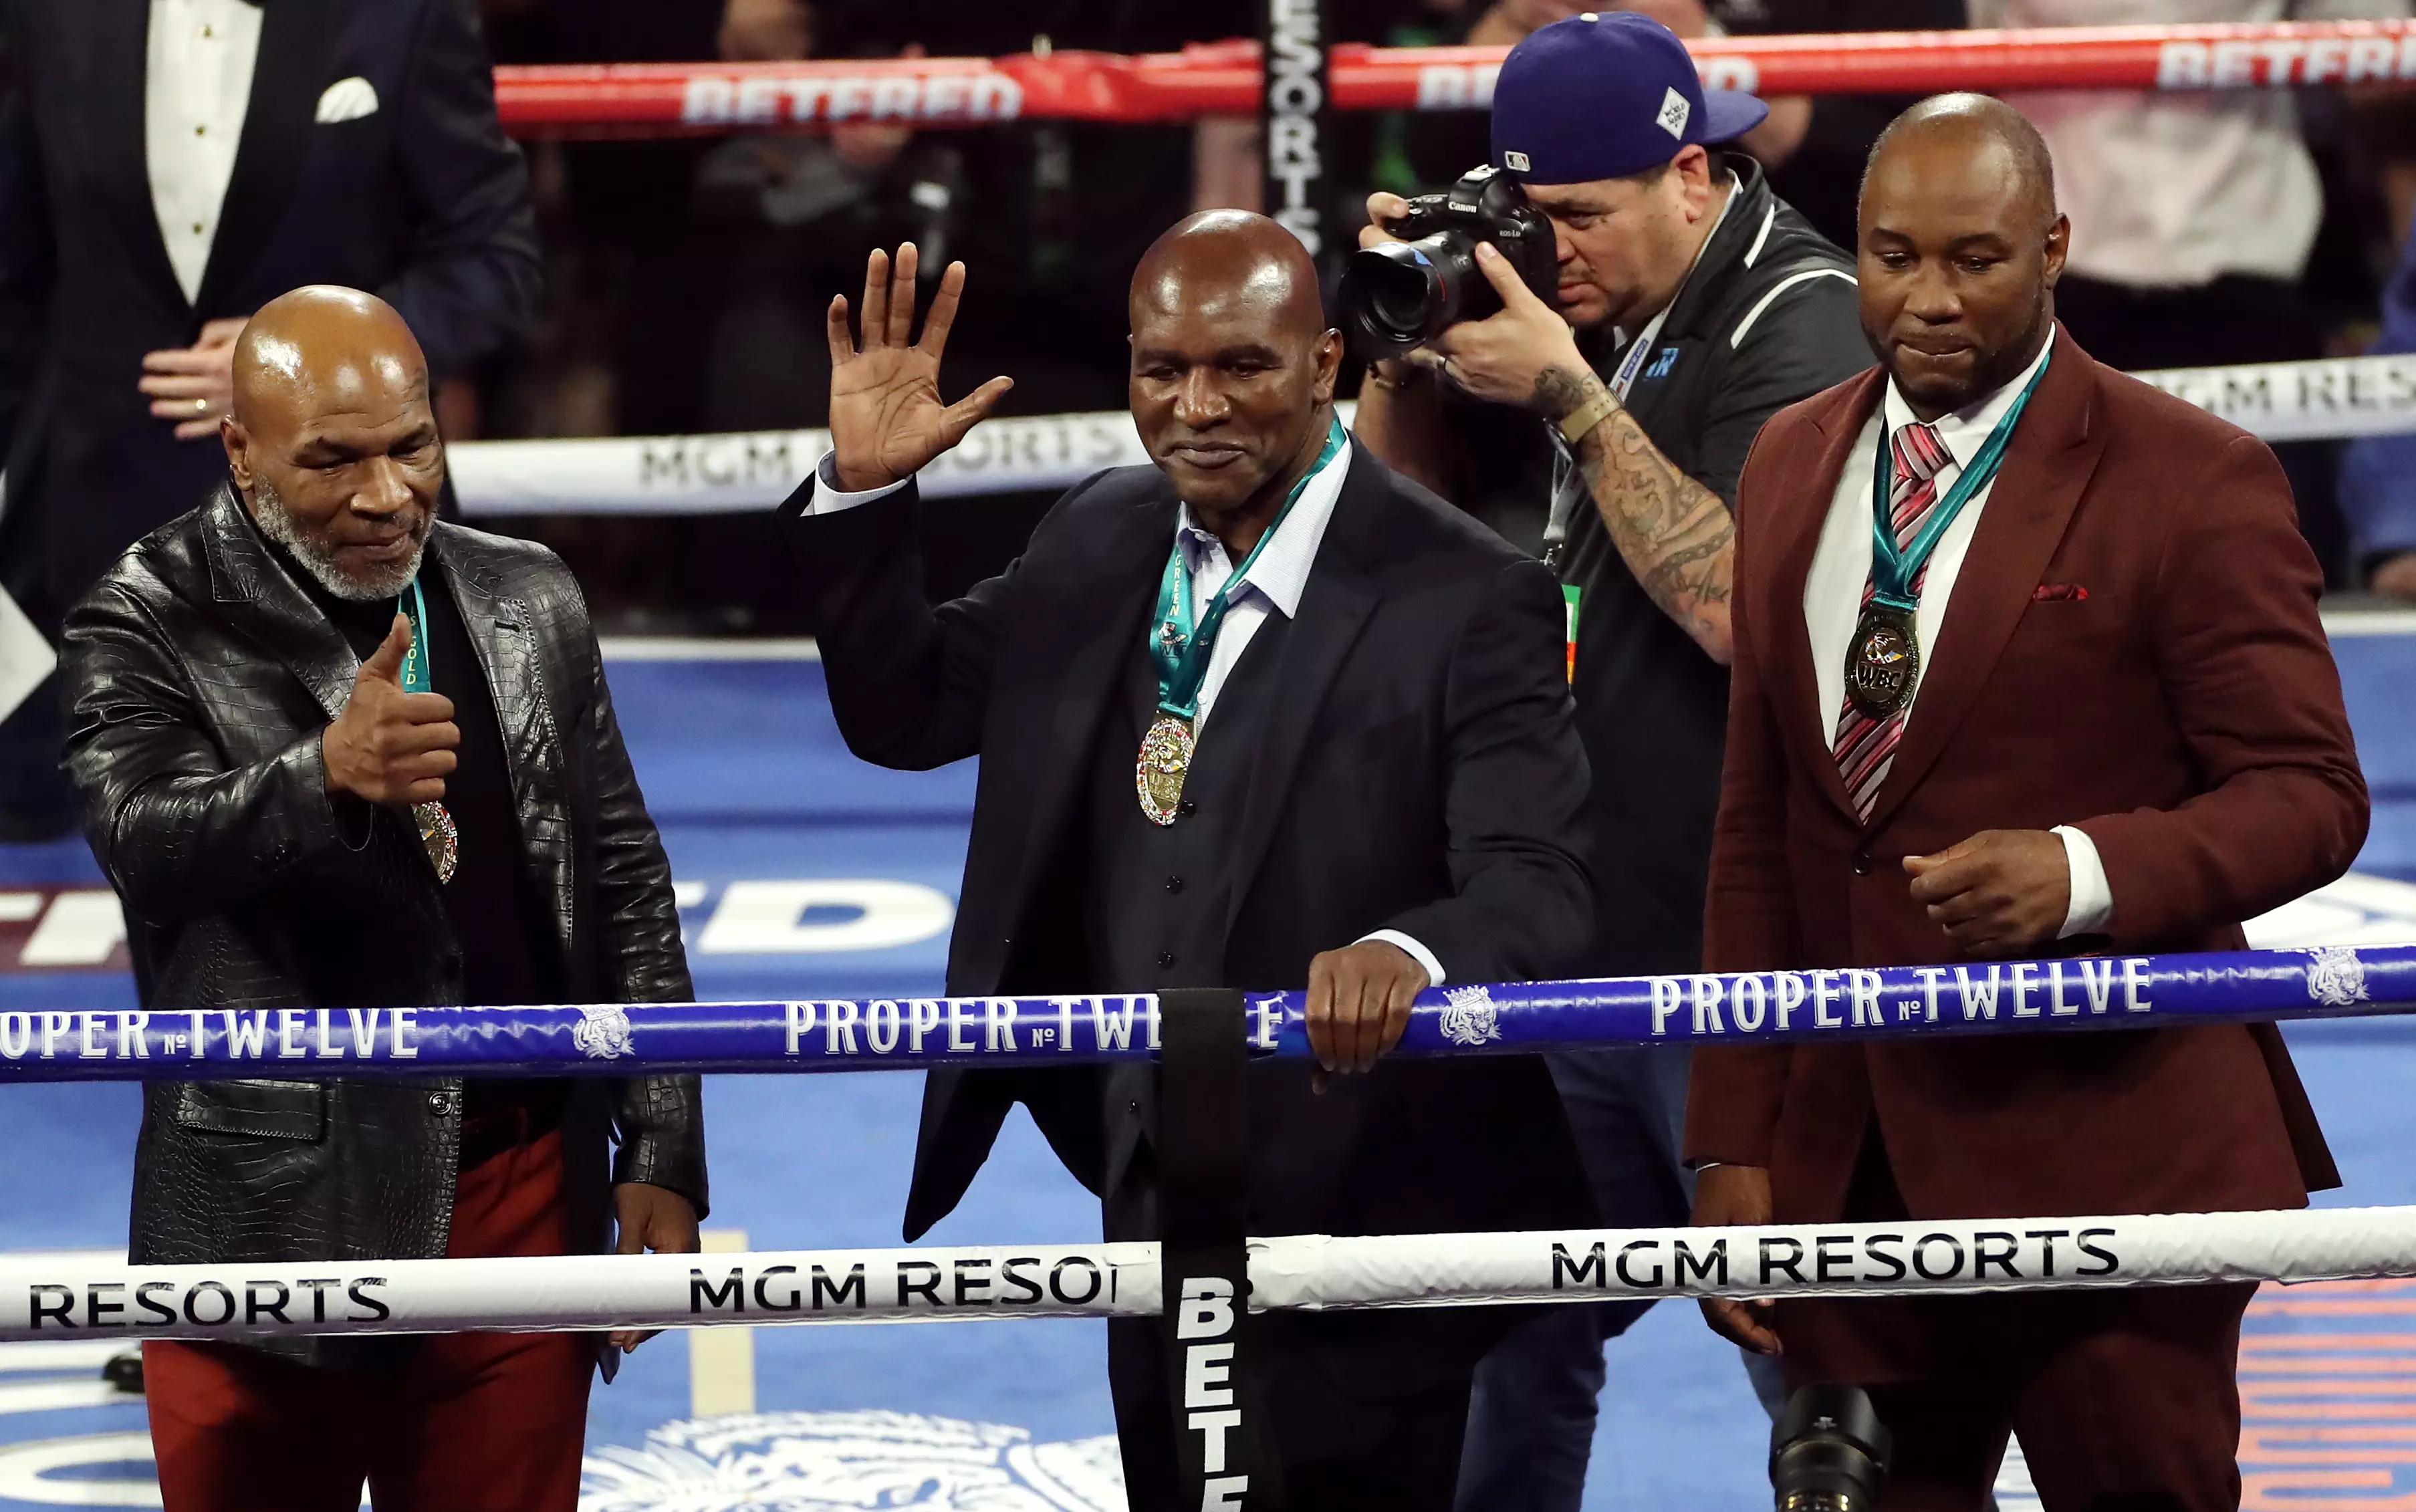 Tyson, Holyfield and Lennox Lewis in the ring ahead of Wilder vs Fury II. Image: PA Images